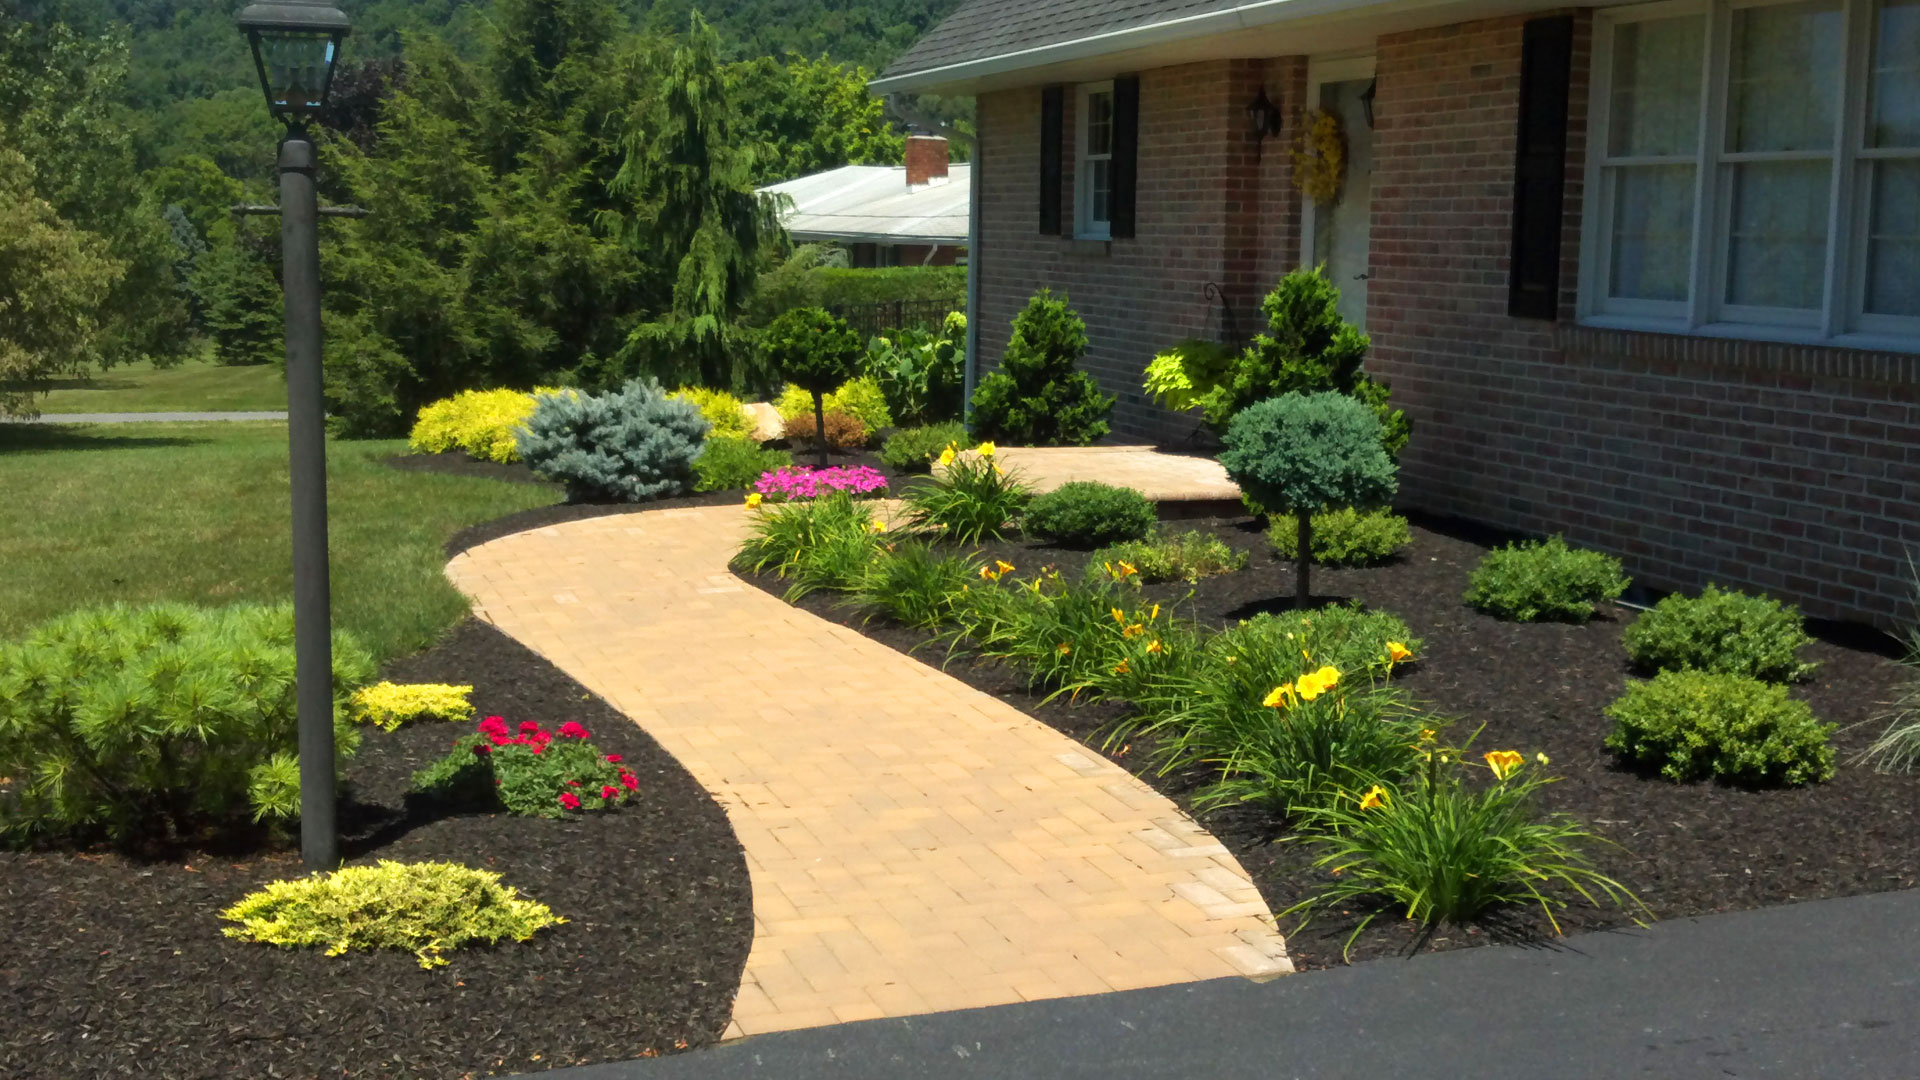 Curved brick walkway with colorful planting